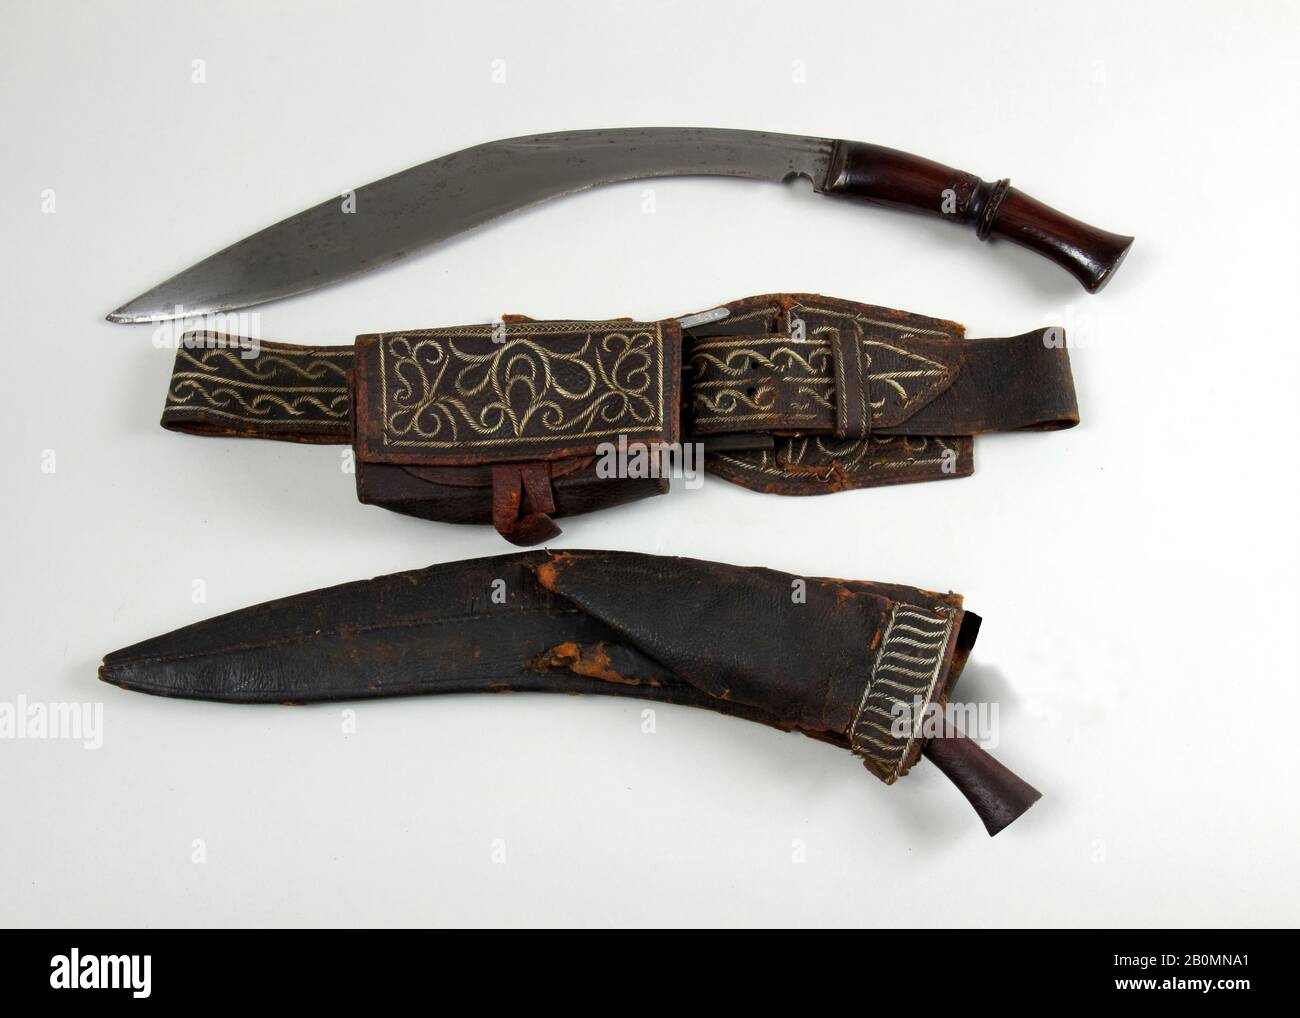 Knife (Kukri) with Sheath, Small Knife, Belt, Pouch and Box, Indian or Nepalese, 19th century, Indian or Nepalese, Steel, wood, leather, quill, H. with sheath 18 1/4 in. (46.4 cm); H. without sheath 18 in. (45.7 cm); W. 2 1/2 in. (6.4 cm); Wt. 1 lb. 0.6 oz. (470.6 g); Wt. of sheath 4.3 oz. (121.9 g); small knife (c); H. 6 1/2 in. (16.5 cm); W. 1 1/2 in. (3.8 cm); Wt. 1.4 oz. (39.7 g); pouch (d); L. 6 1/4 in. (15.9 cm); Wt. 0.6 oz. (17 g); belt (e); L. 37 in. (94.0 cm); Wt. 5.2 oz. (147.4 g); loop (f); L. 10 1/2 in. (26.7 cm); Wt. 1.5 oz. (42.5 g); box (g); H. 3 in. (7.6 cm); W. 5 in. (12.7 cm Stock Photo